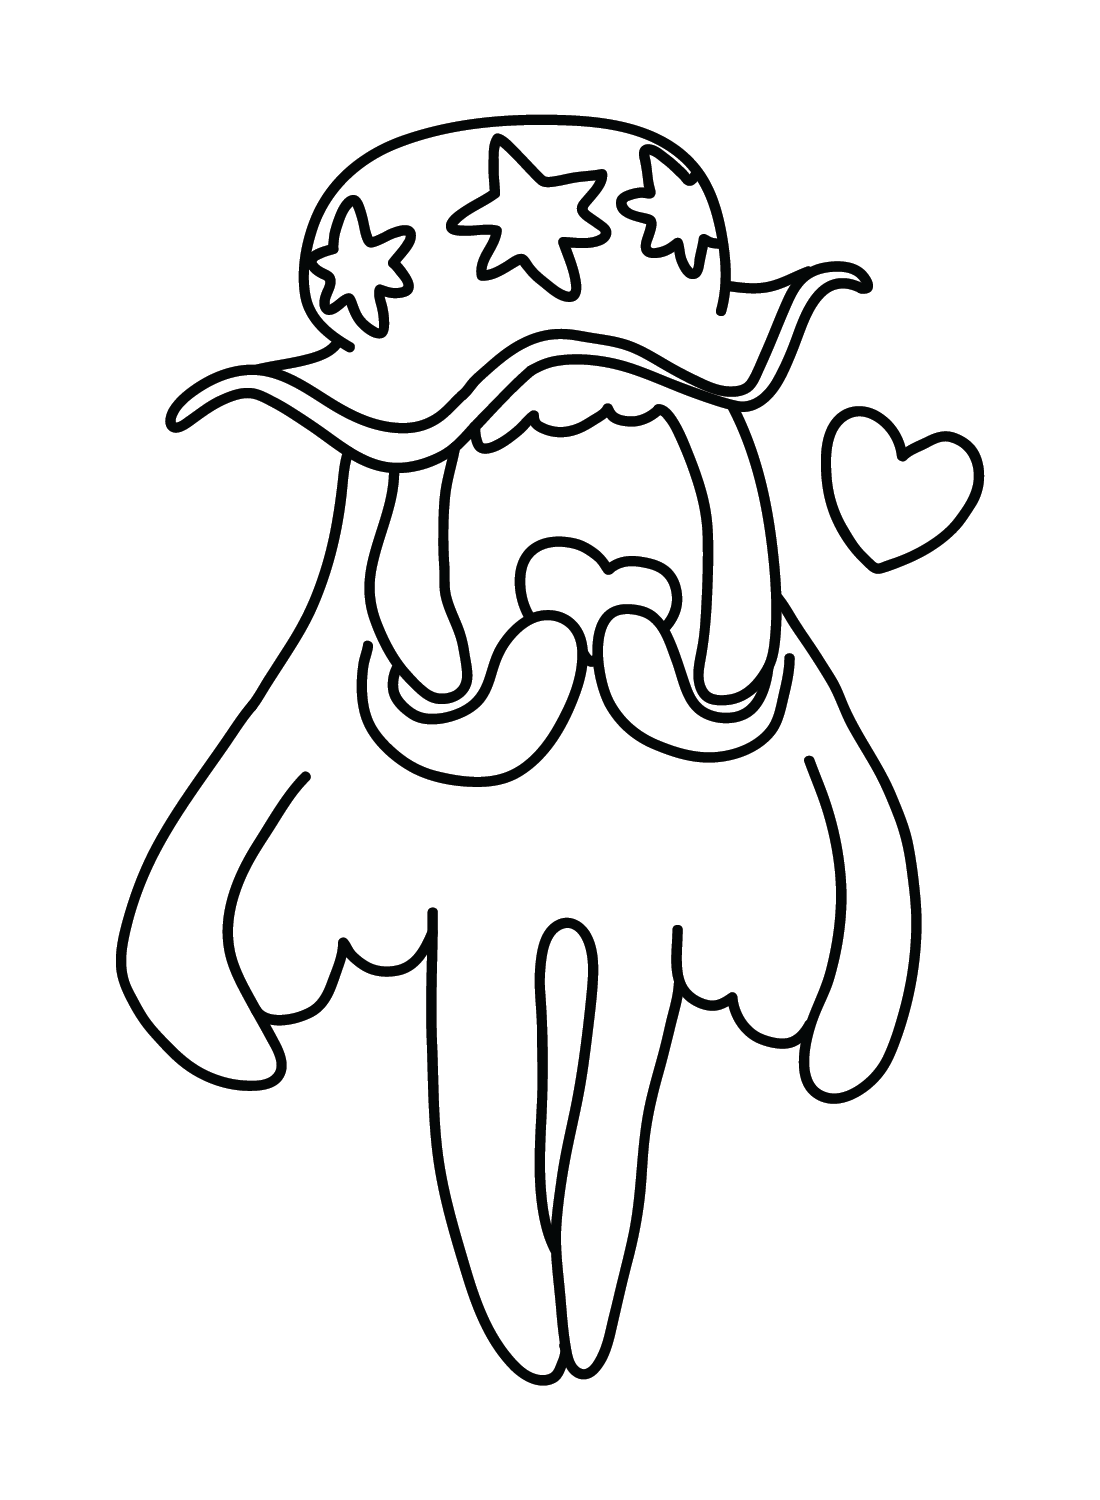 Nihilego for Kids Coloring Page